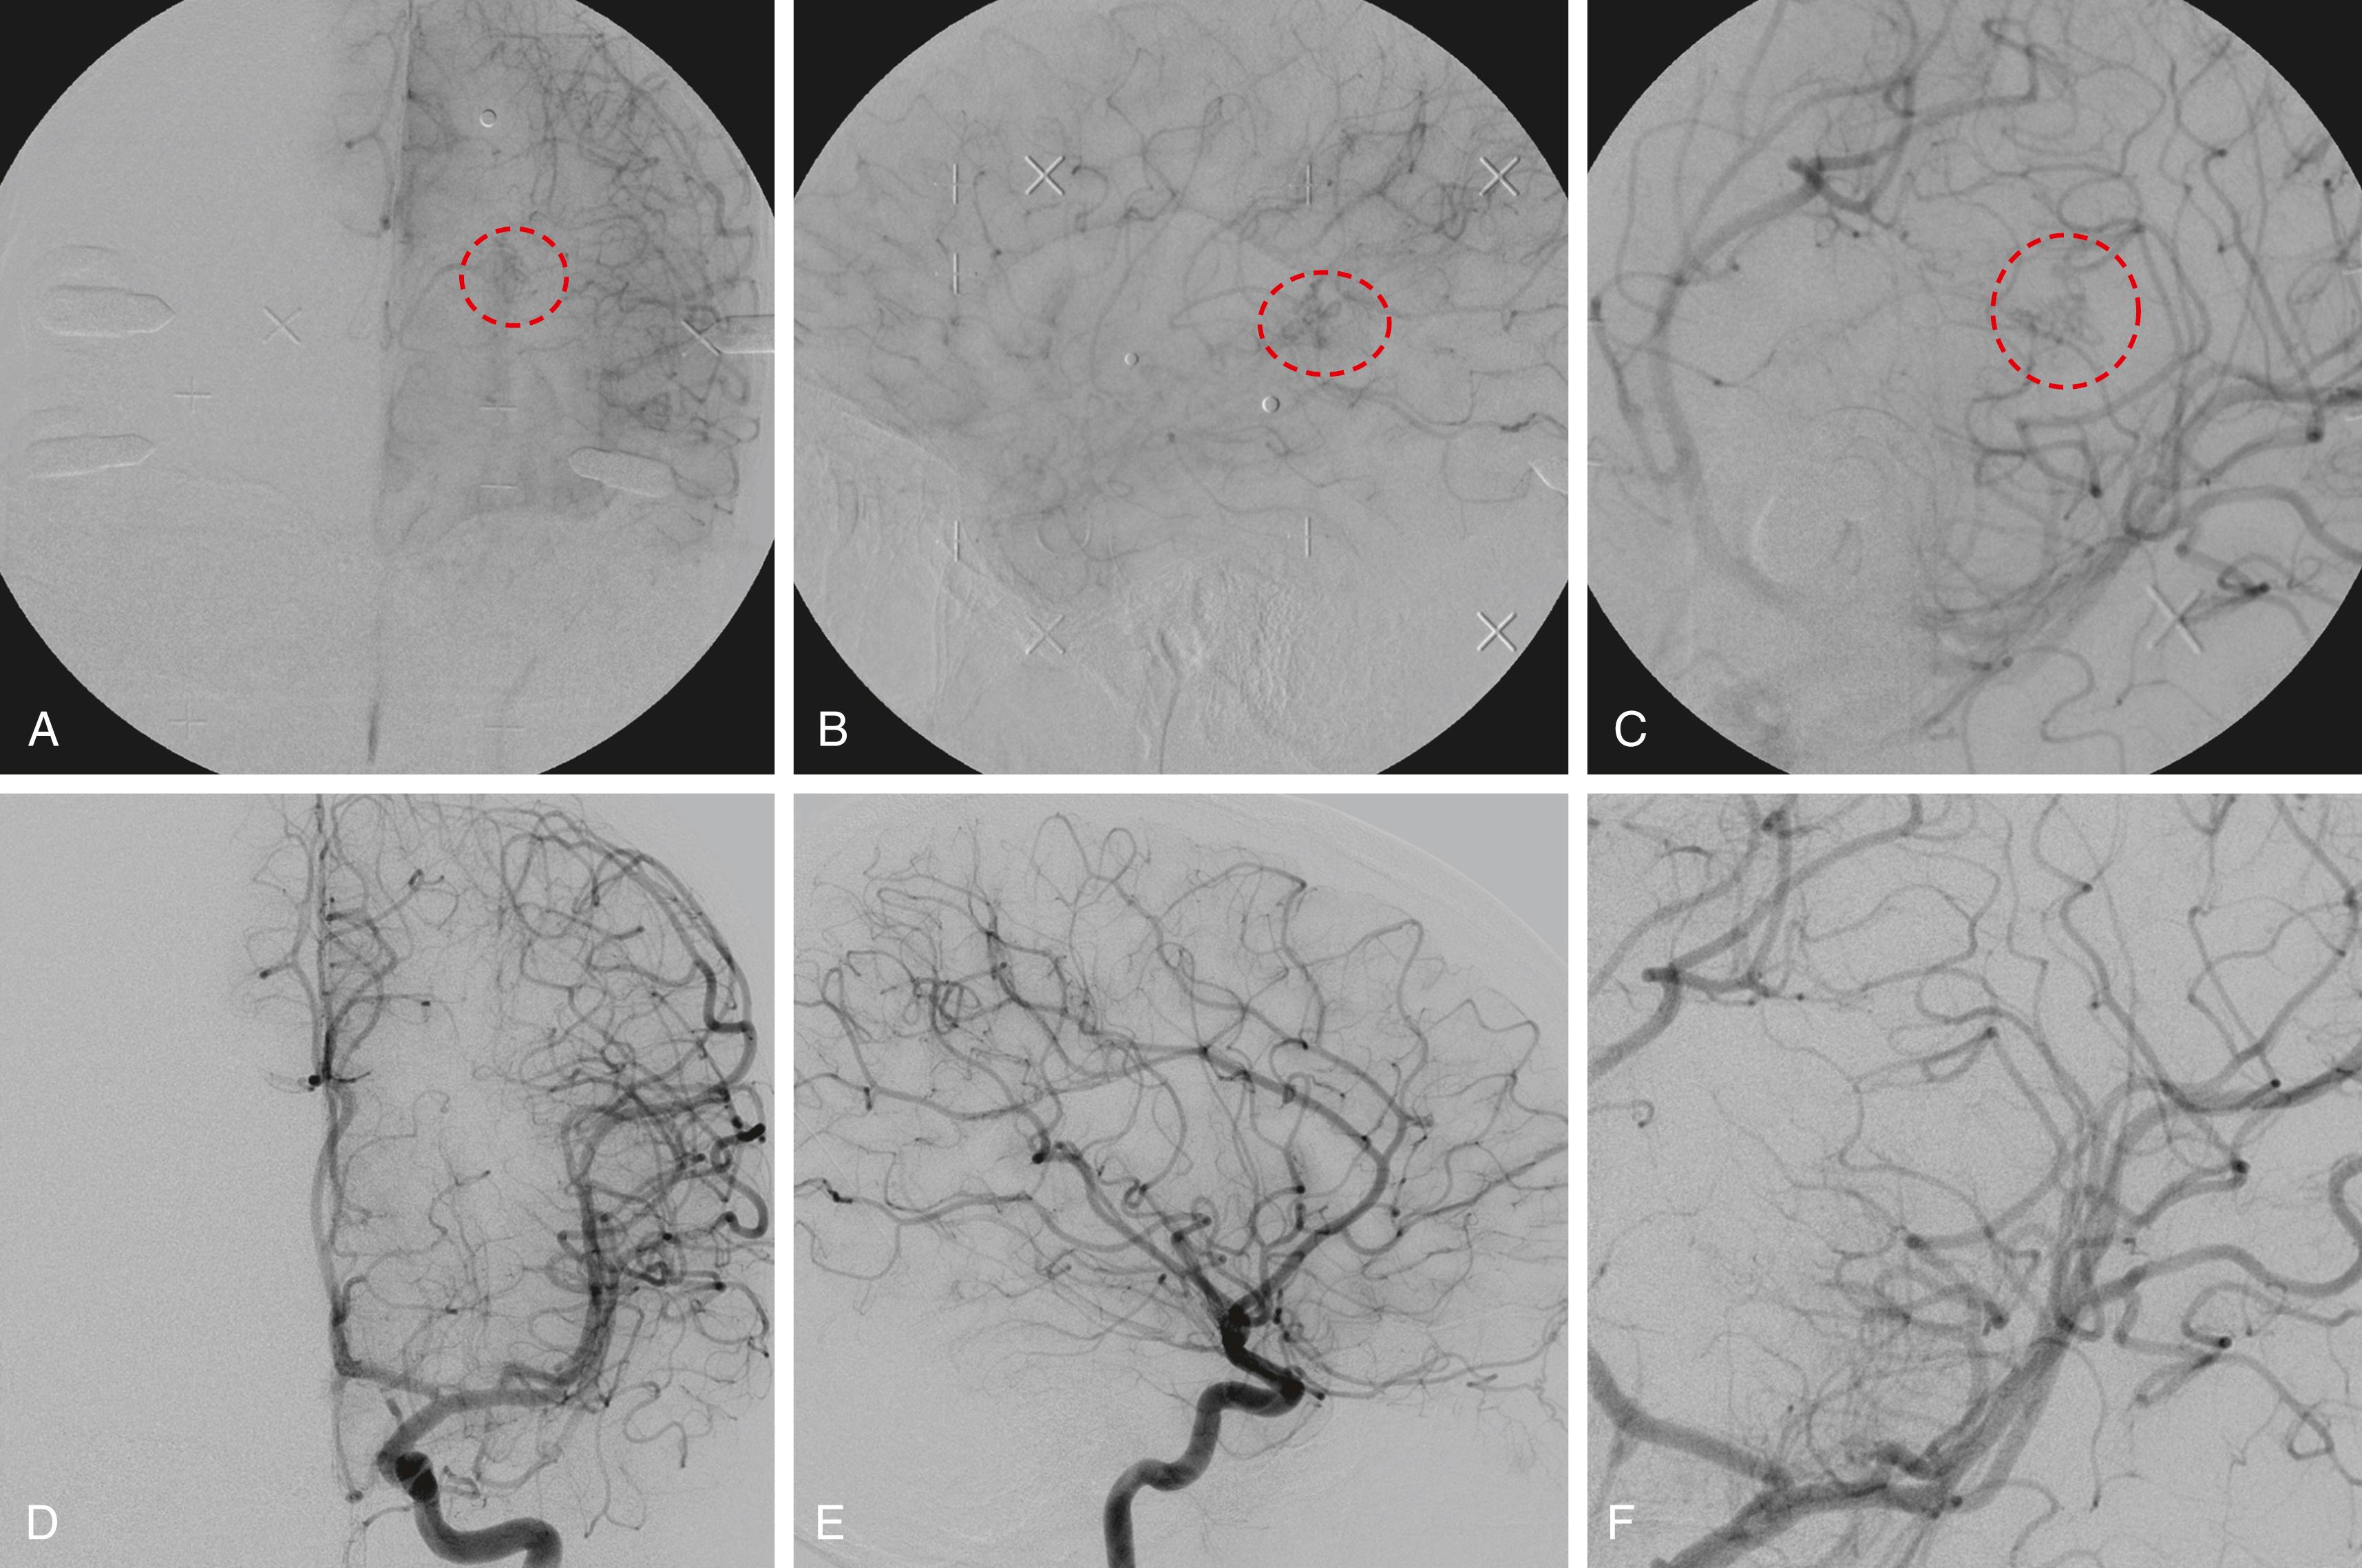 FIGURE 96.1, (A–F) This was an 11-year-old male with a history of a large left-sided intracerebral hemorrhage in 2007, and subsequent neuroimaging demonstrated a small left basal ganglia arteriovenous malformation (AVM). Digital subtraction angiography (DSA) in the anteroposterior (A), lateral (B), and oblique (C) views demonstrated a left basal ganglia Spetzler-Martin grade III AVM that measured 1.2 × 1 × 0.6 cm (red dashed circles) . The AVM was fed by mildly enlarged lenticulostriate arteries, with deep venous drainage into the left thalamostriate vein. There was no evidence of associated aneurysms. Approximately 6 months after the hemorrhage, the patient underwent stereotactic radiosurgery (Gamma Knife) using a margin dose of 25 Gy to the 50% isodose line and three isocenters. Follow-up DSA (D–F) in 2009 demonstrated complete obliteration of the AVM.